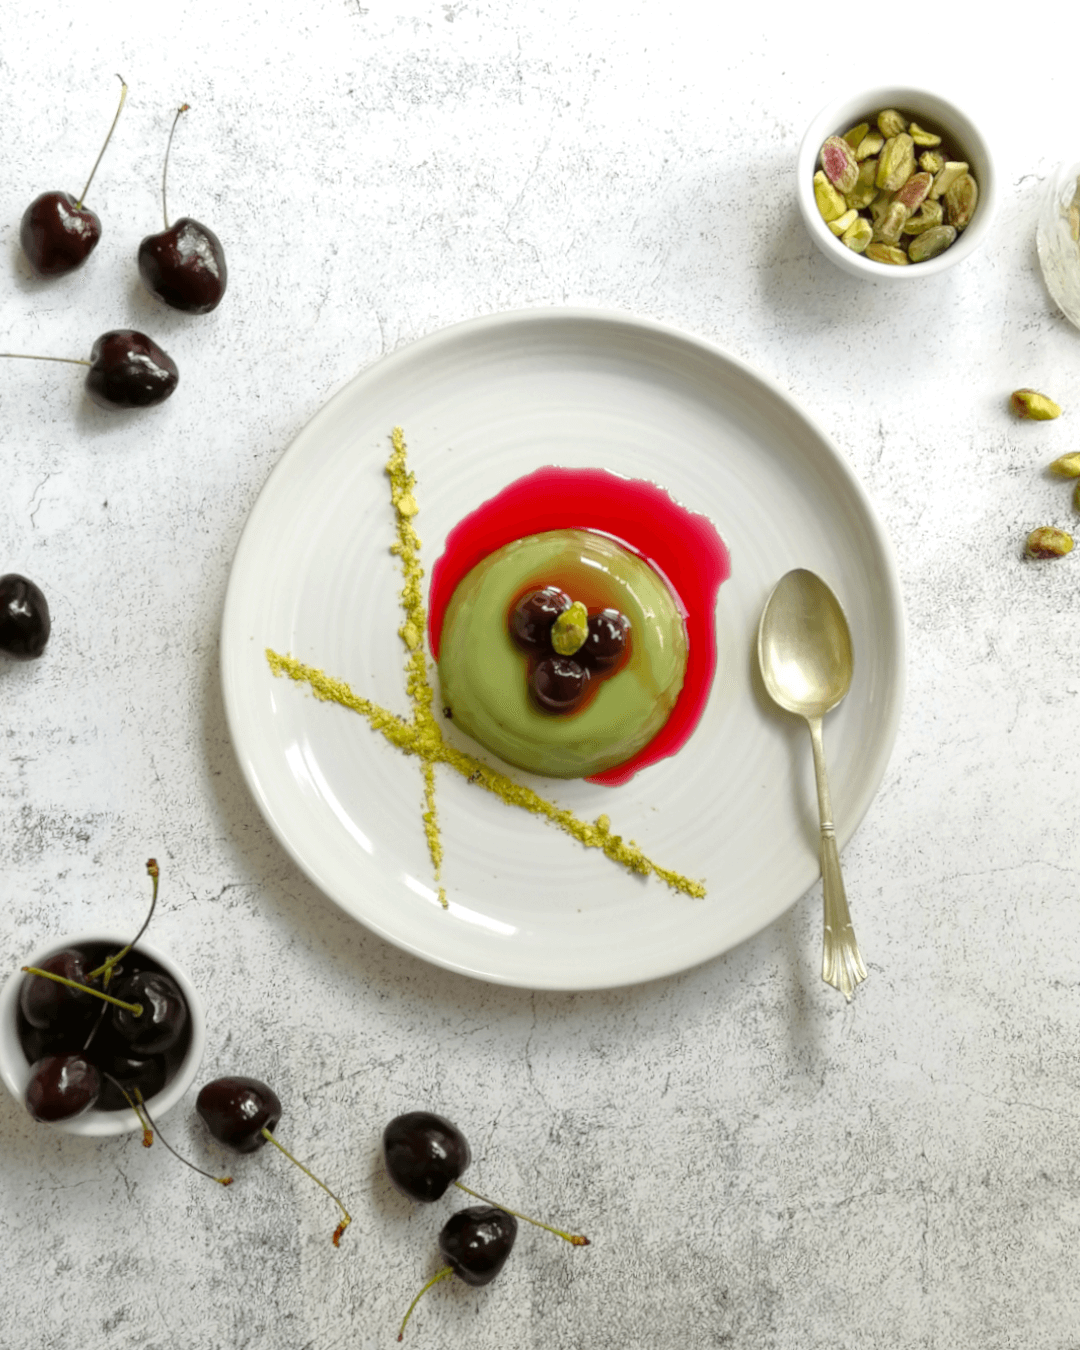 Pistacchio panna cotta seen from overhead, topped with three amarena cherries and purple cherry syrup